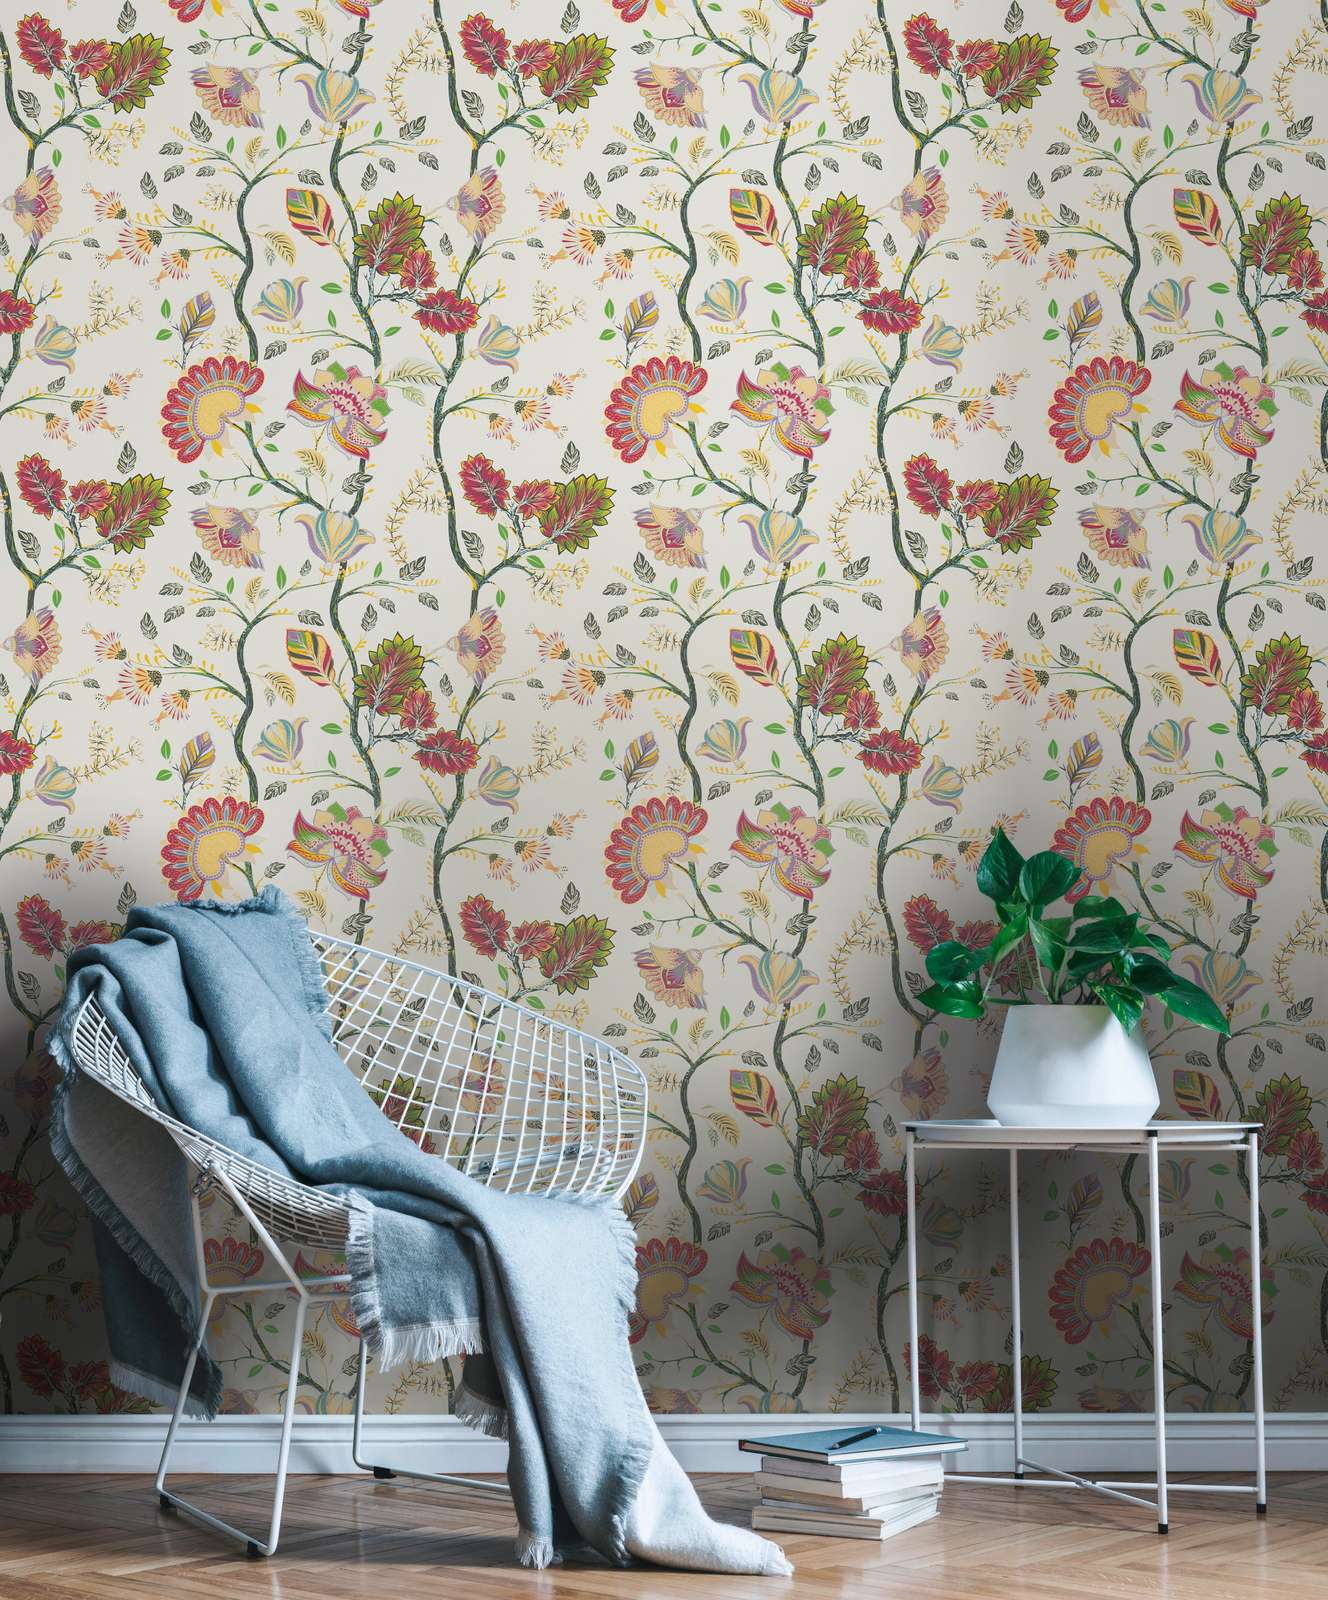             Floral non-woven wallpaper with bold colours - red, yellow, green
        